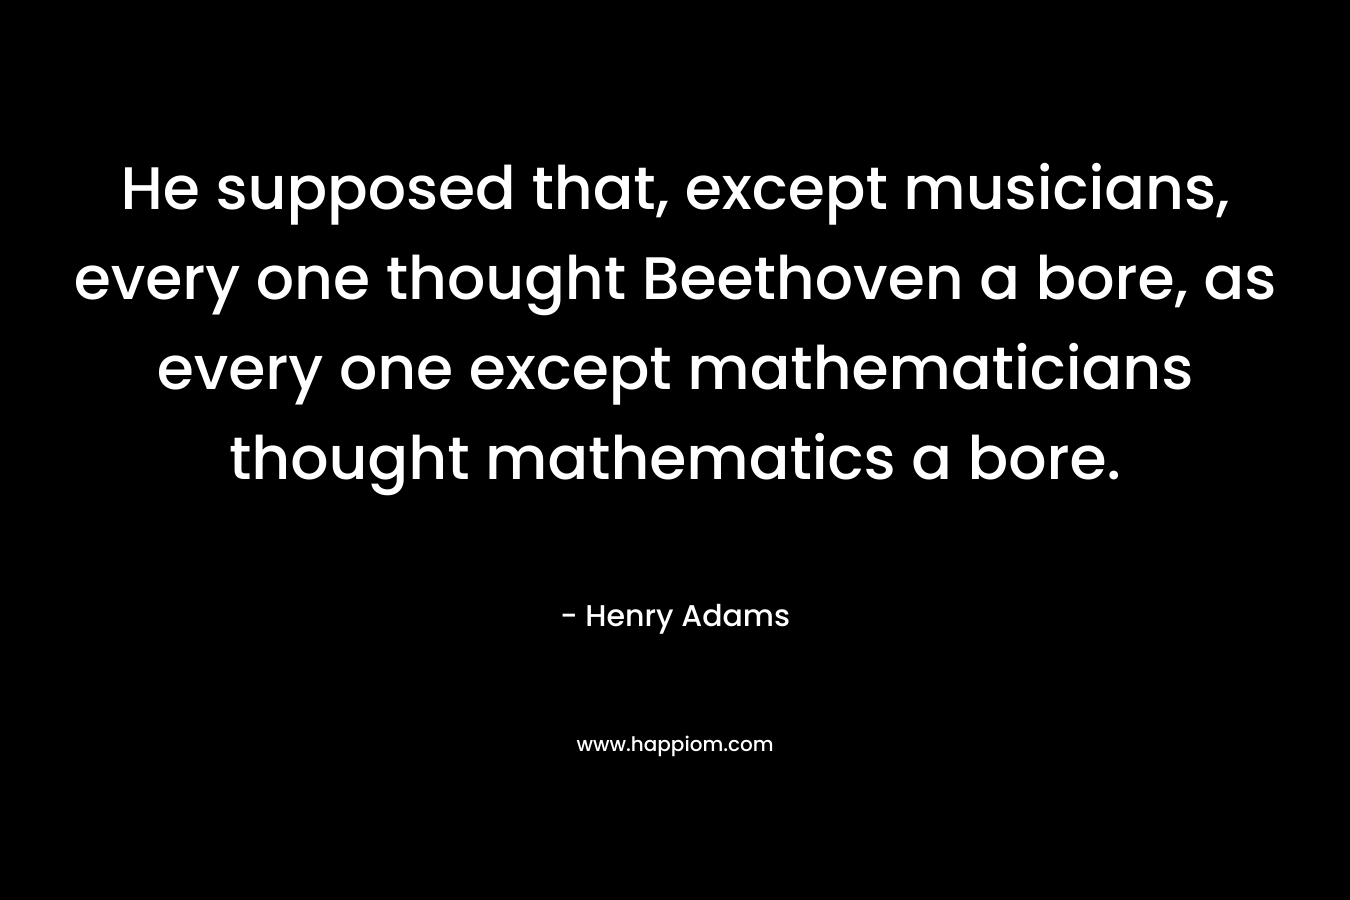 He supposed that, except musicians, every one thought Beethoven a bore, as every one except mathematicians thought mathematics a bore. – Henry Adams